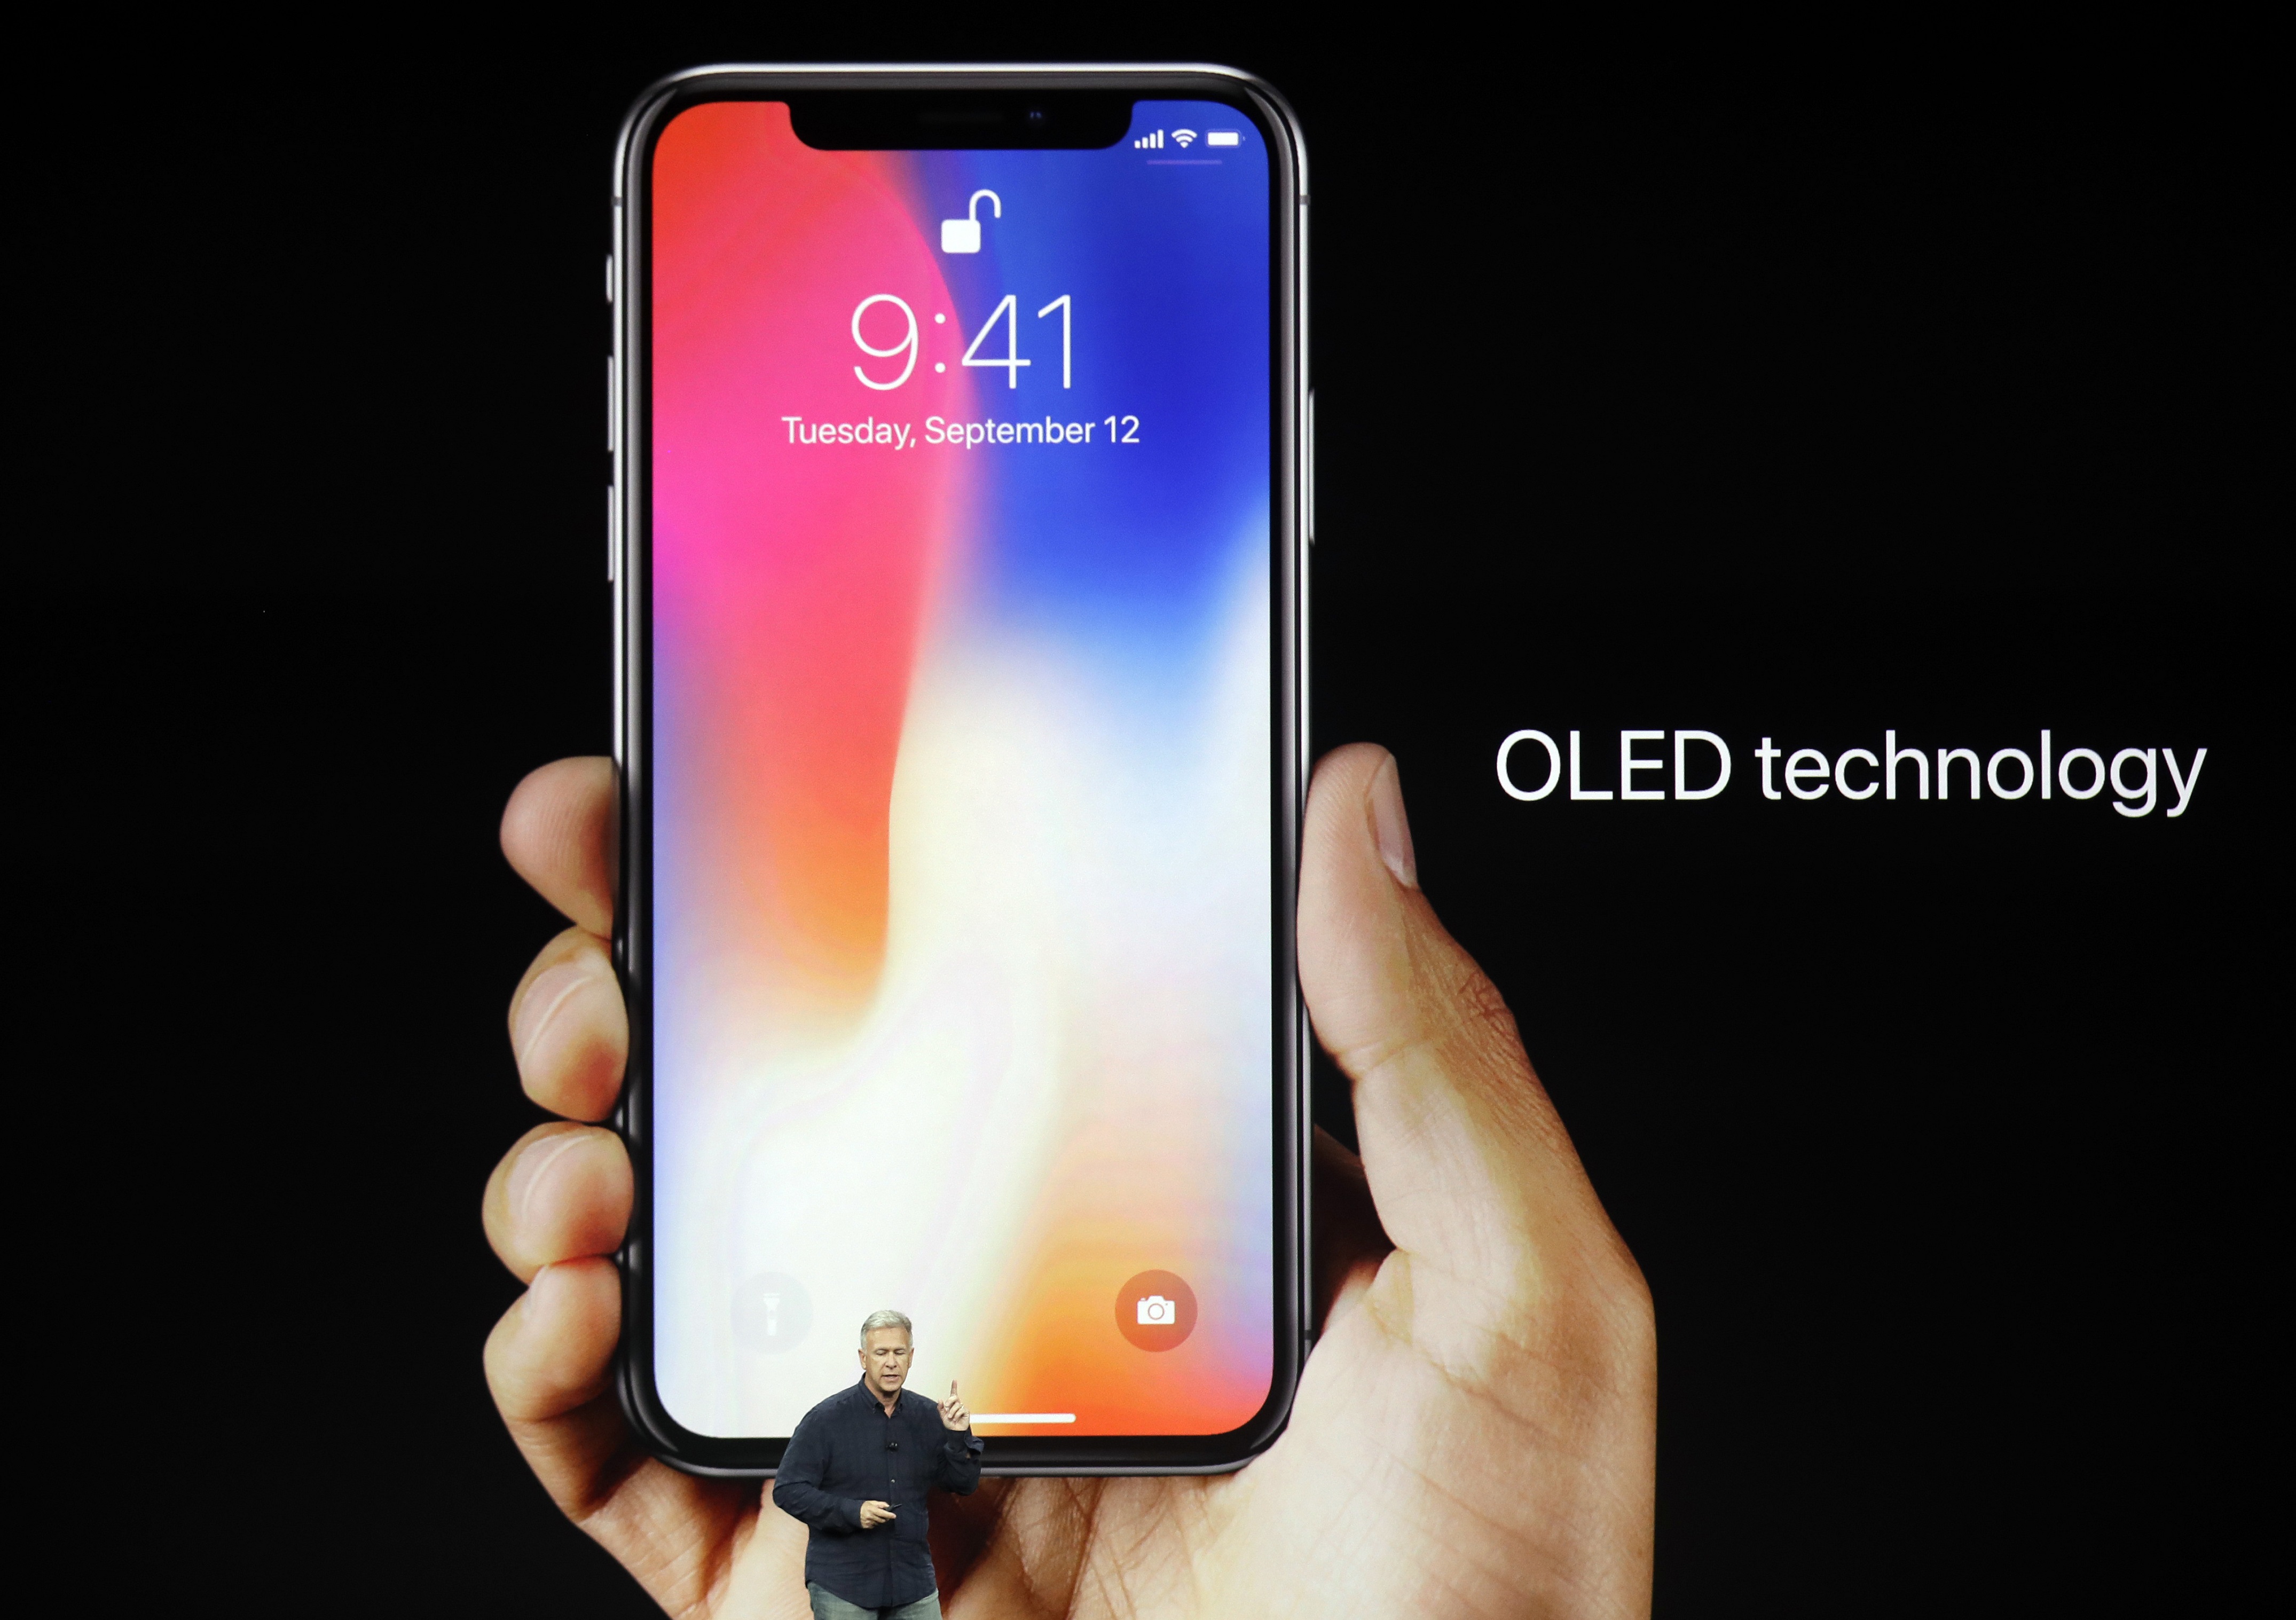 The iPhone X in someone's hand